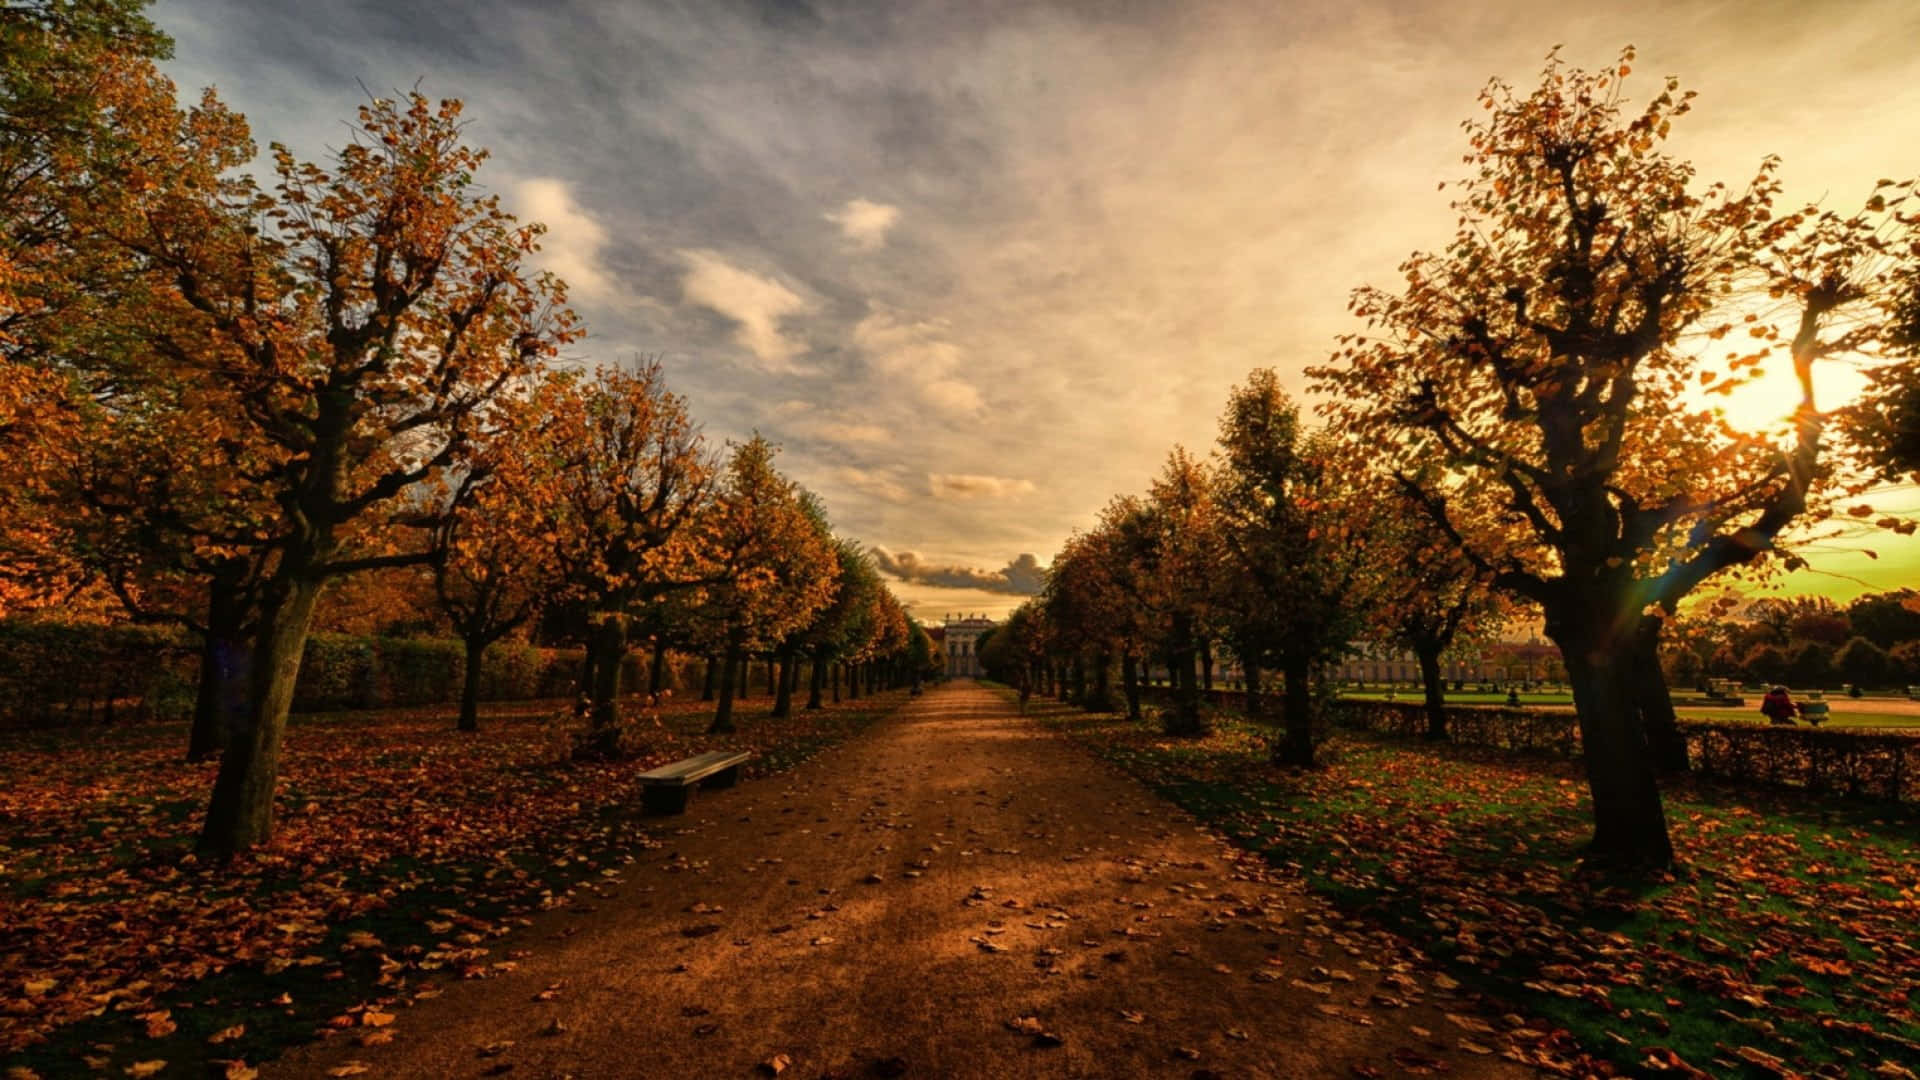 A Path Lined With Trees In The Autumn